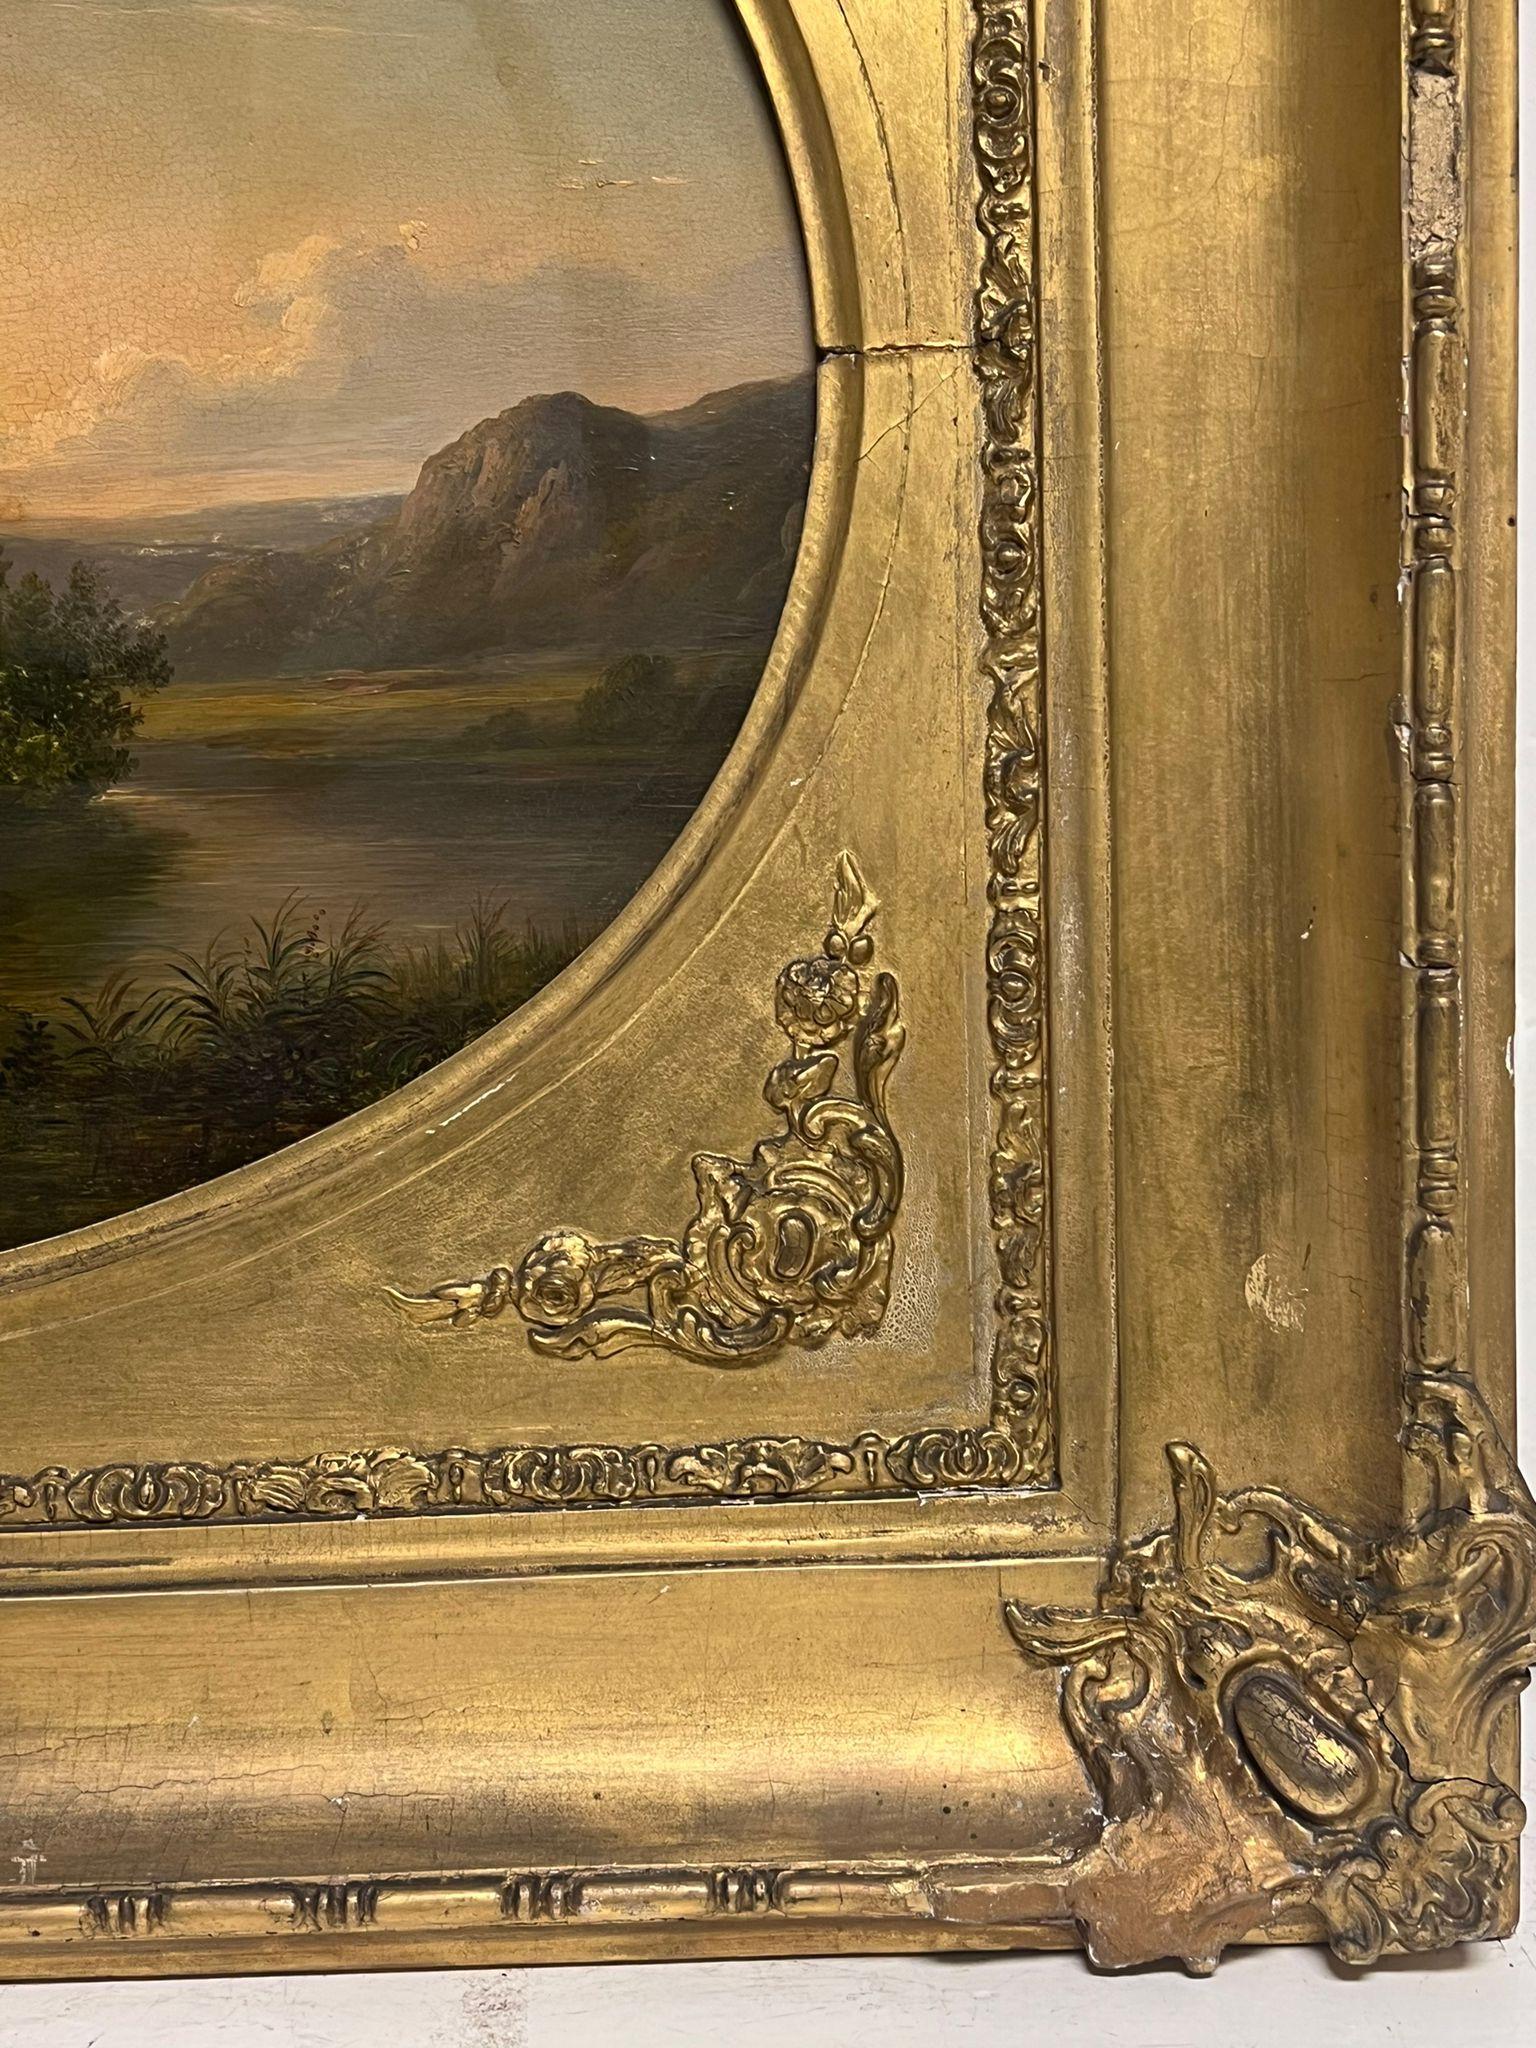 Romantic Sunset Landsca
English School, early 1800's period
oil on wood panel, framed in antique gilt frame
framed: 27 x 31.5 inches
panel: 16 x 21.5 inches
provenance: private collection, England
Christies auction stencil marks and sticker to the